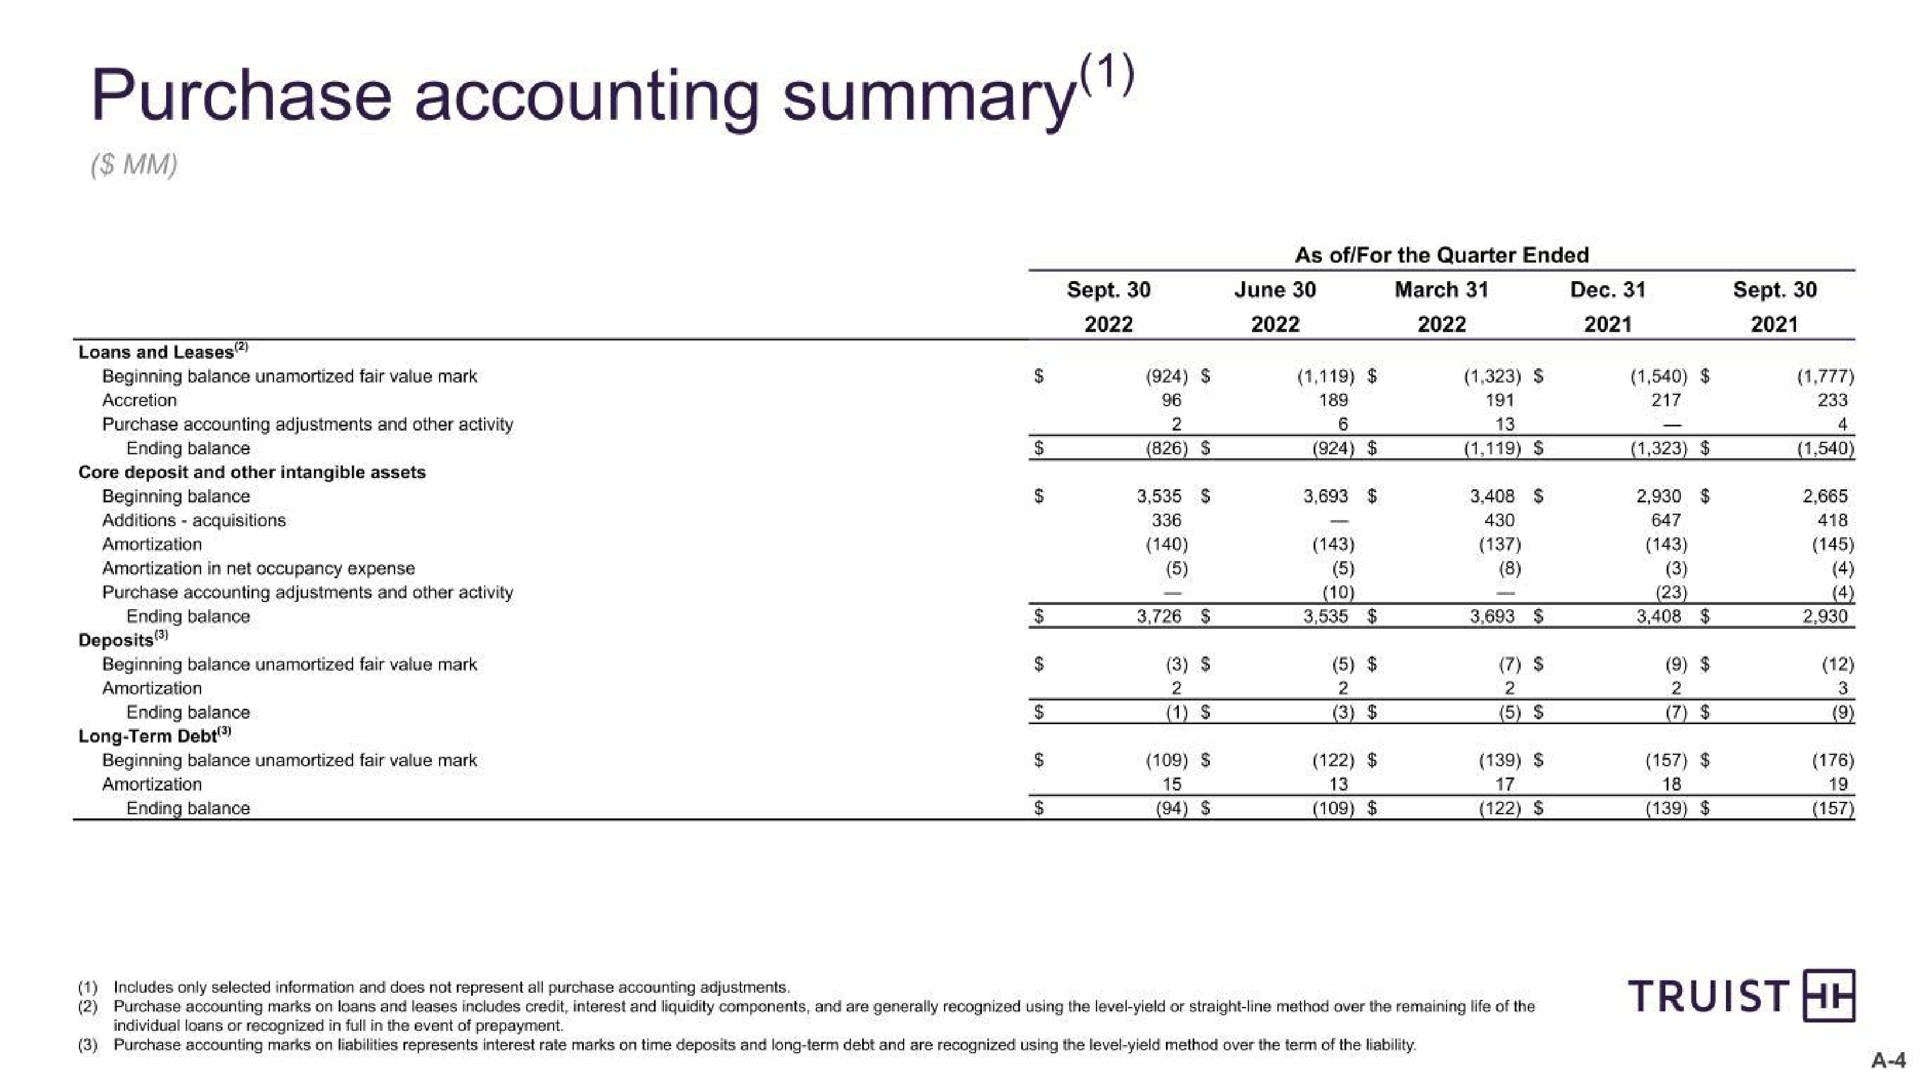 purchase accounting summary | Truist Financial Corp